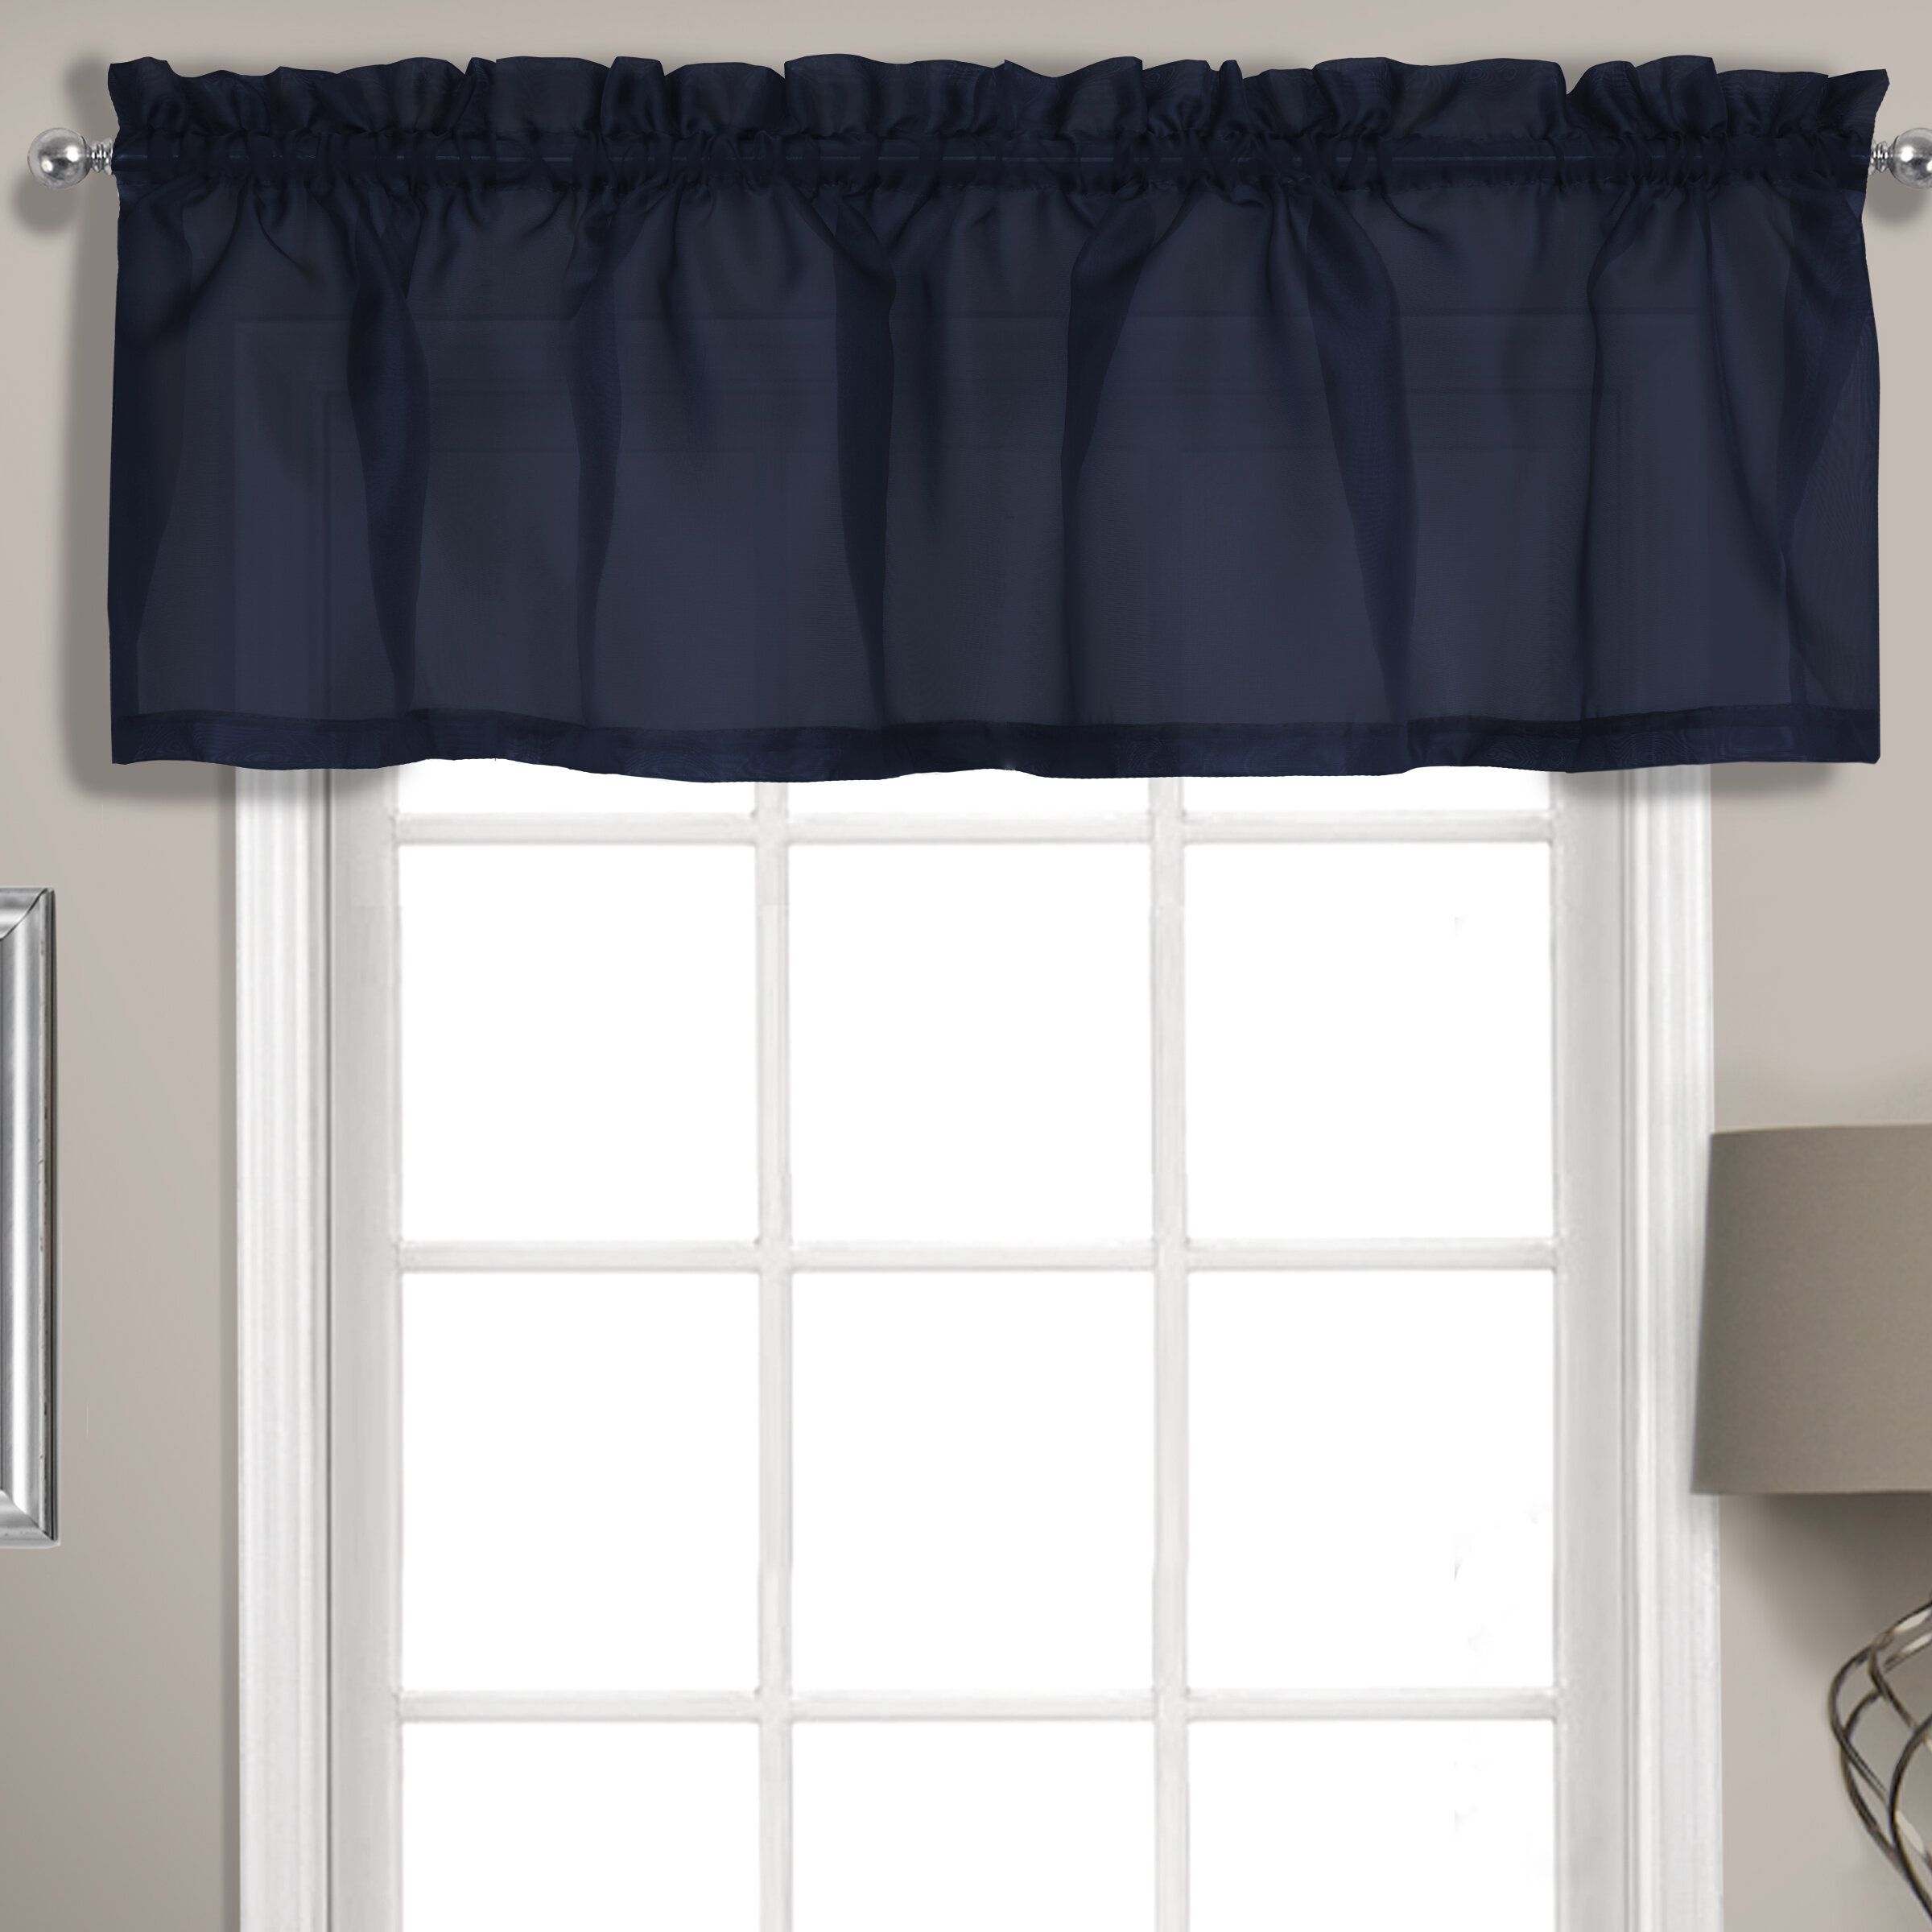 Rutherford Sheer Voile Straight Topper 56" Window Valance In Sheer Voile Ruffled Tier Window Curtain Panels (View 13 of 20)